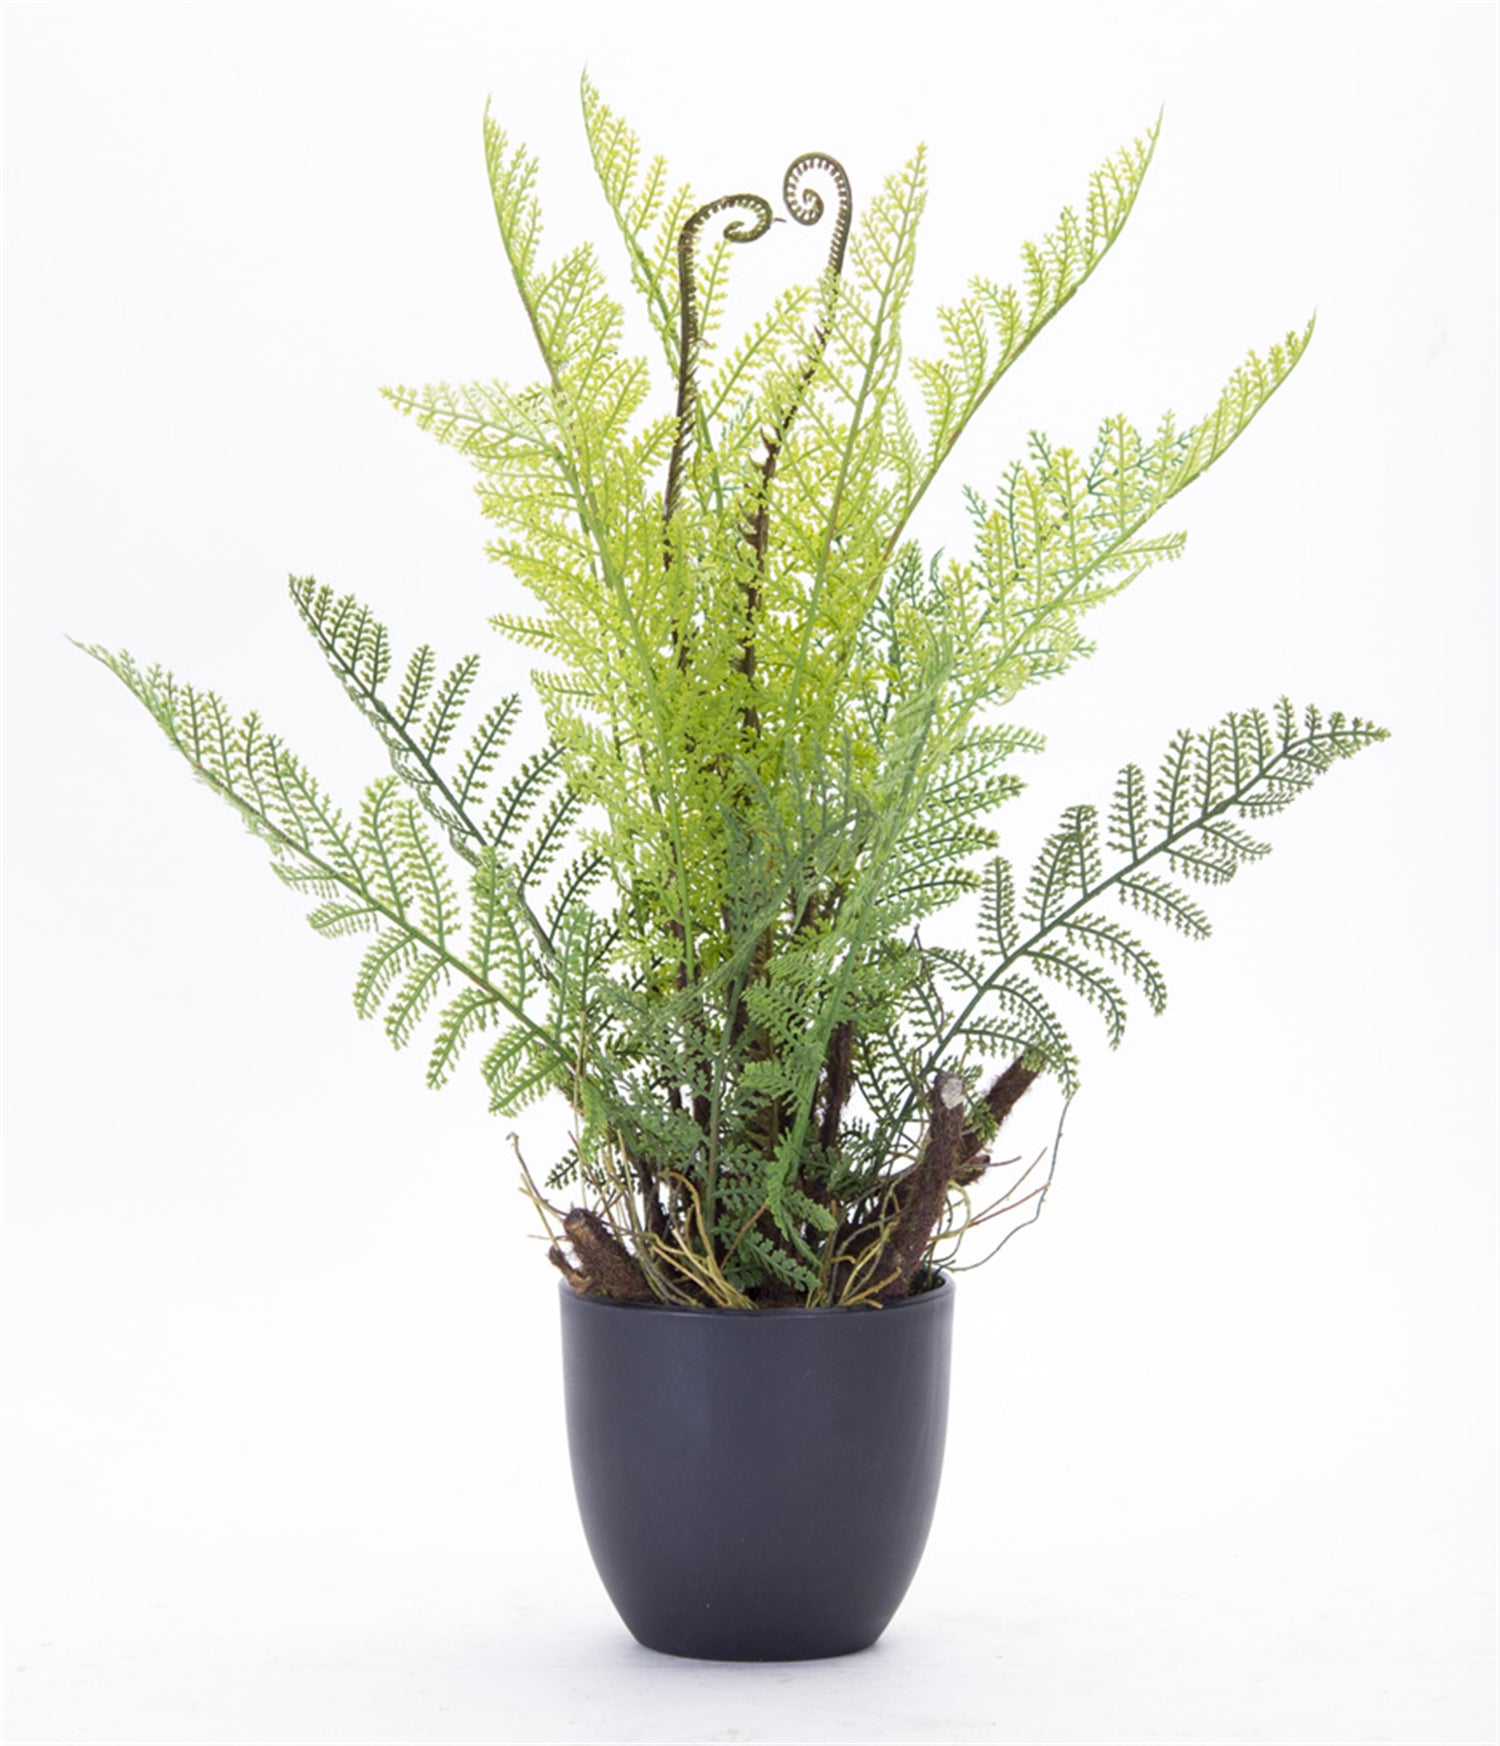 Fern Potted (Set of 2) 11" x 18"H Plastic